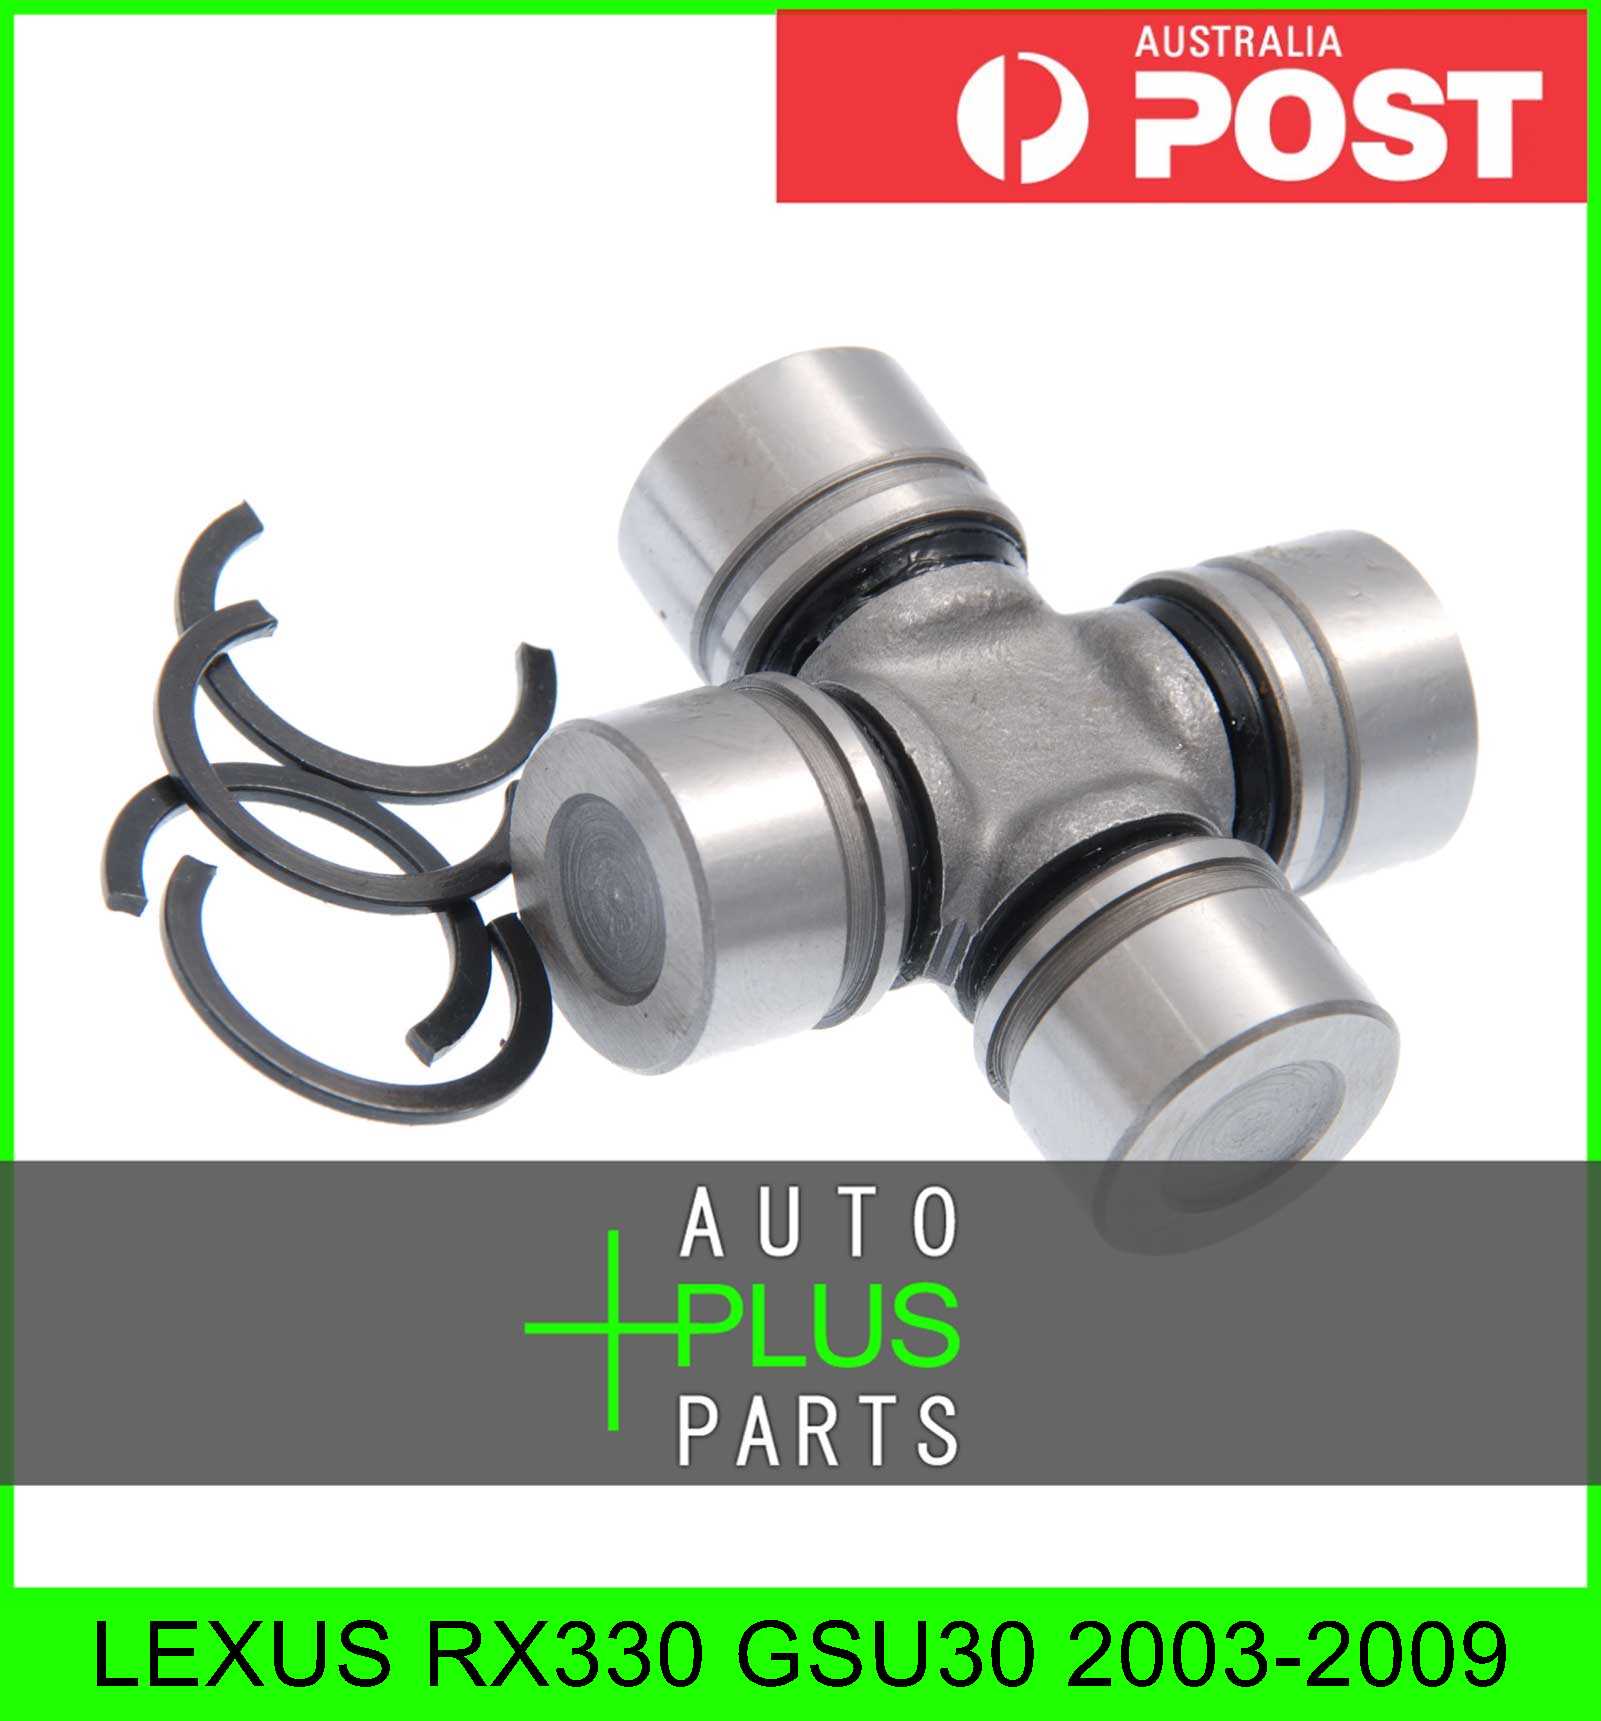 Universal Joint 24X56 For Bmw X5 E70 2006-2013